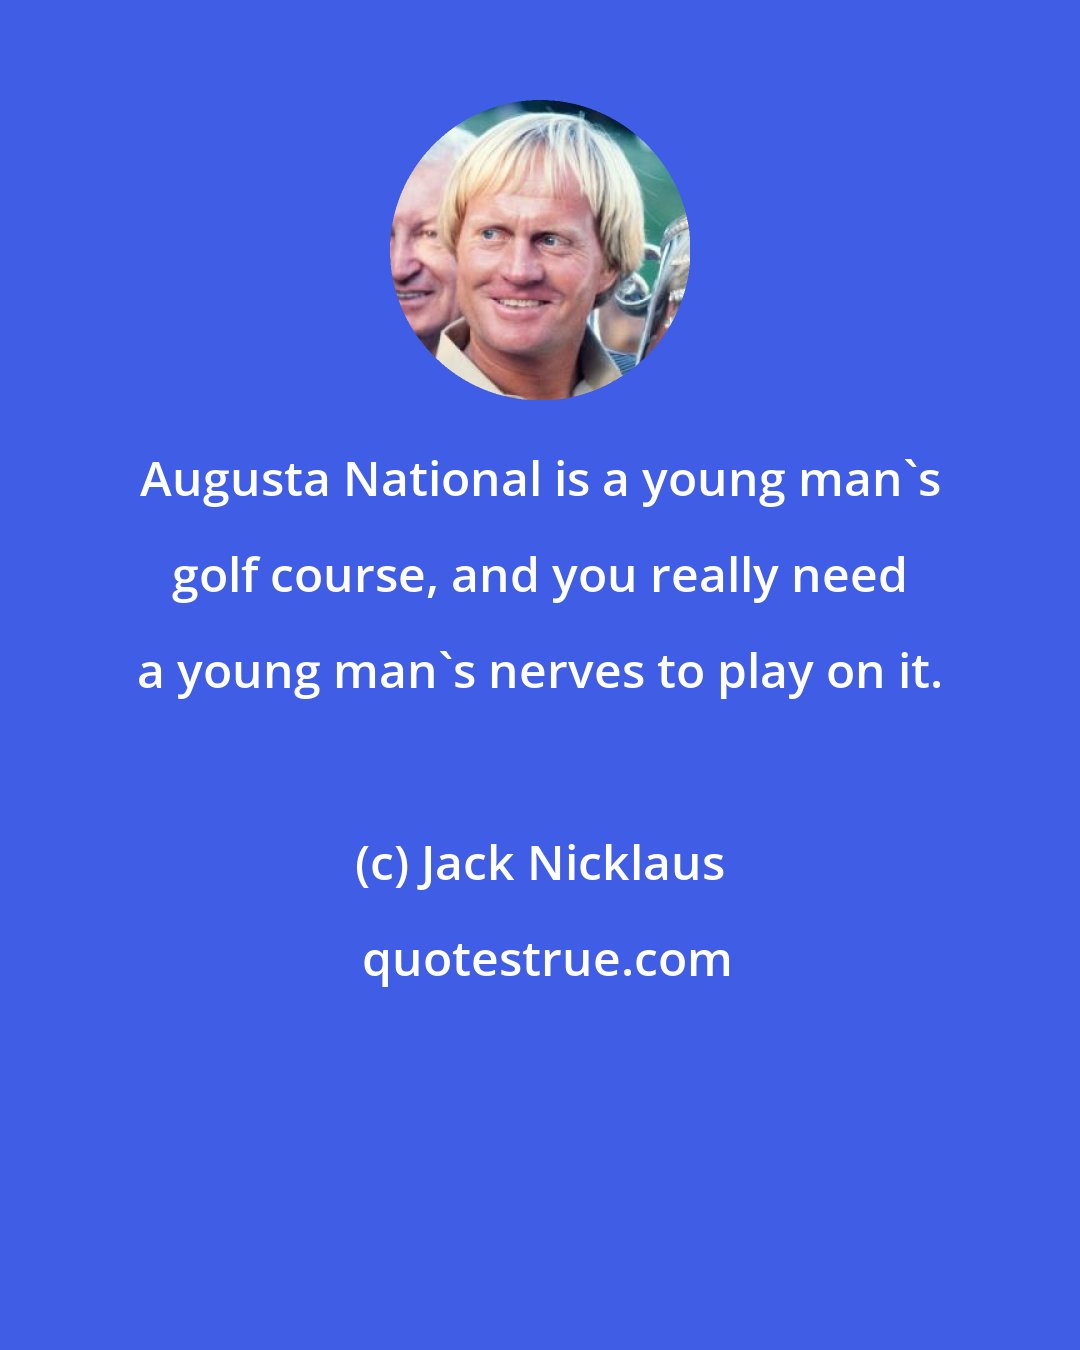 Jack Nicklaus: Augusta National is a young man's golf course, and you really need a young man's nerves to play on it.